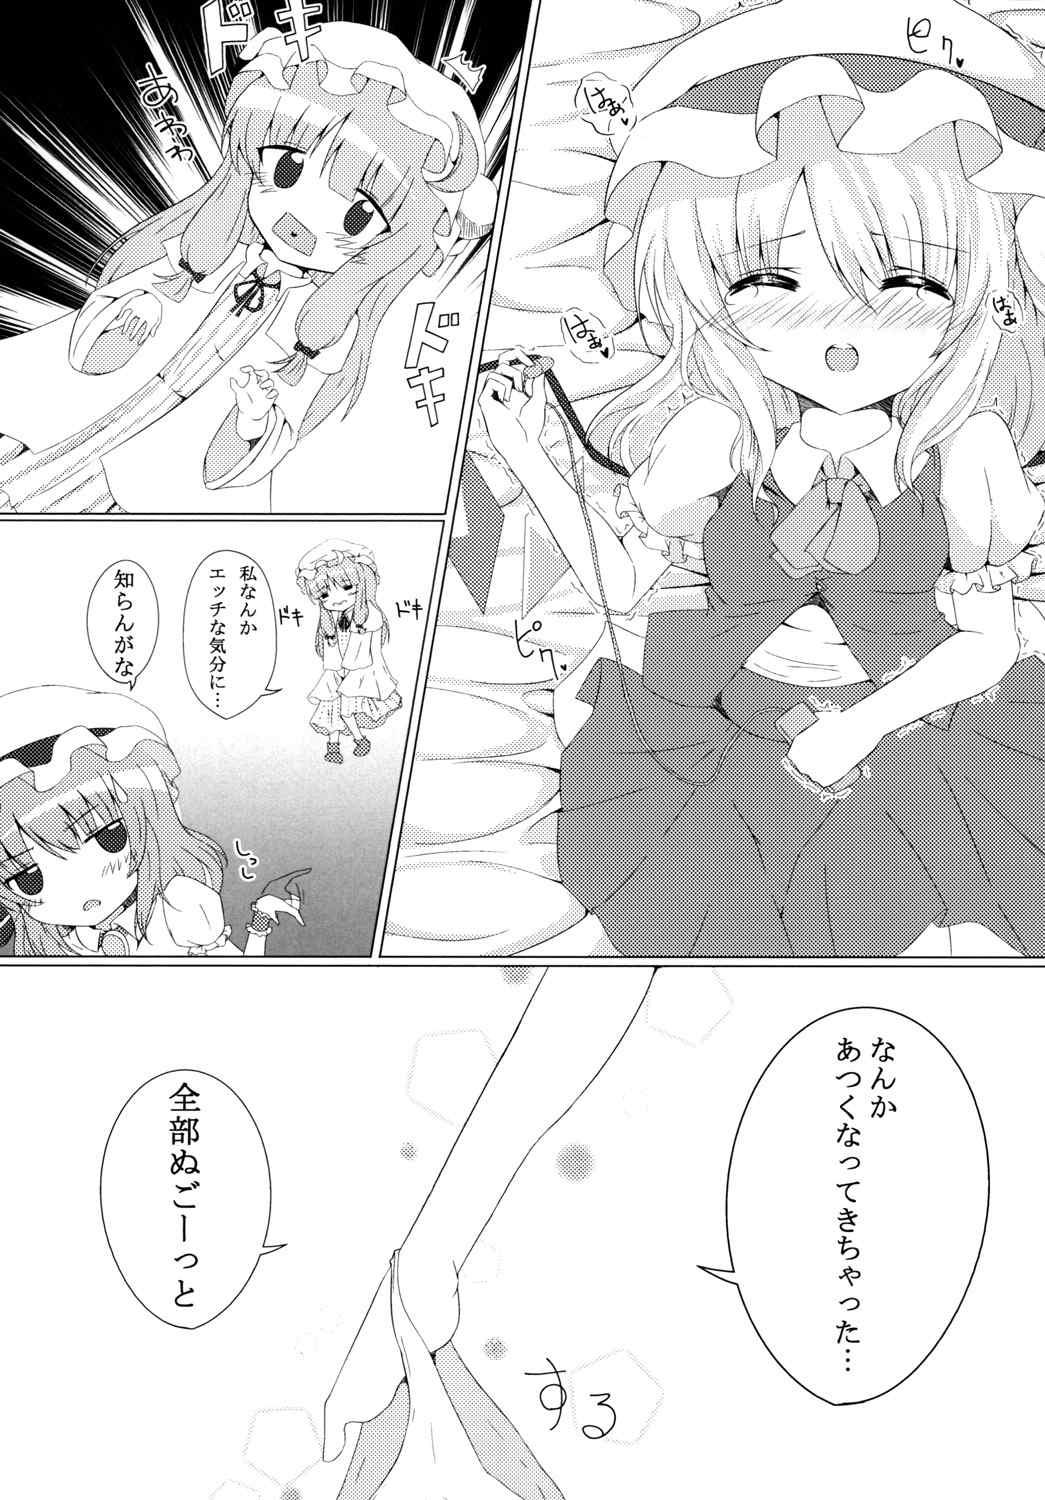 Relax Hitori Asobi - Touhou project Homemade - Page 11